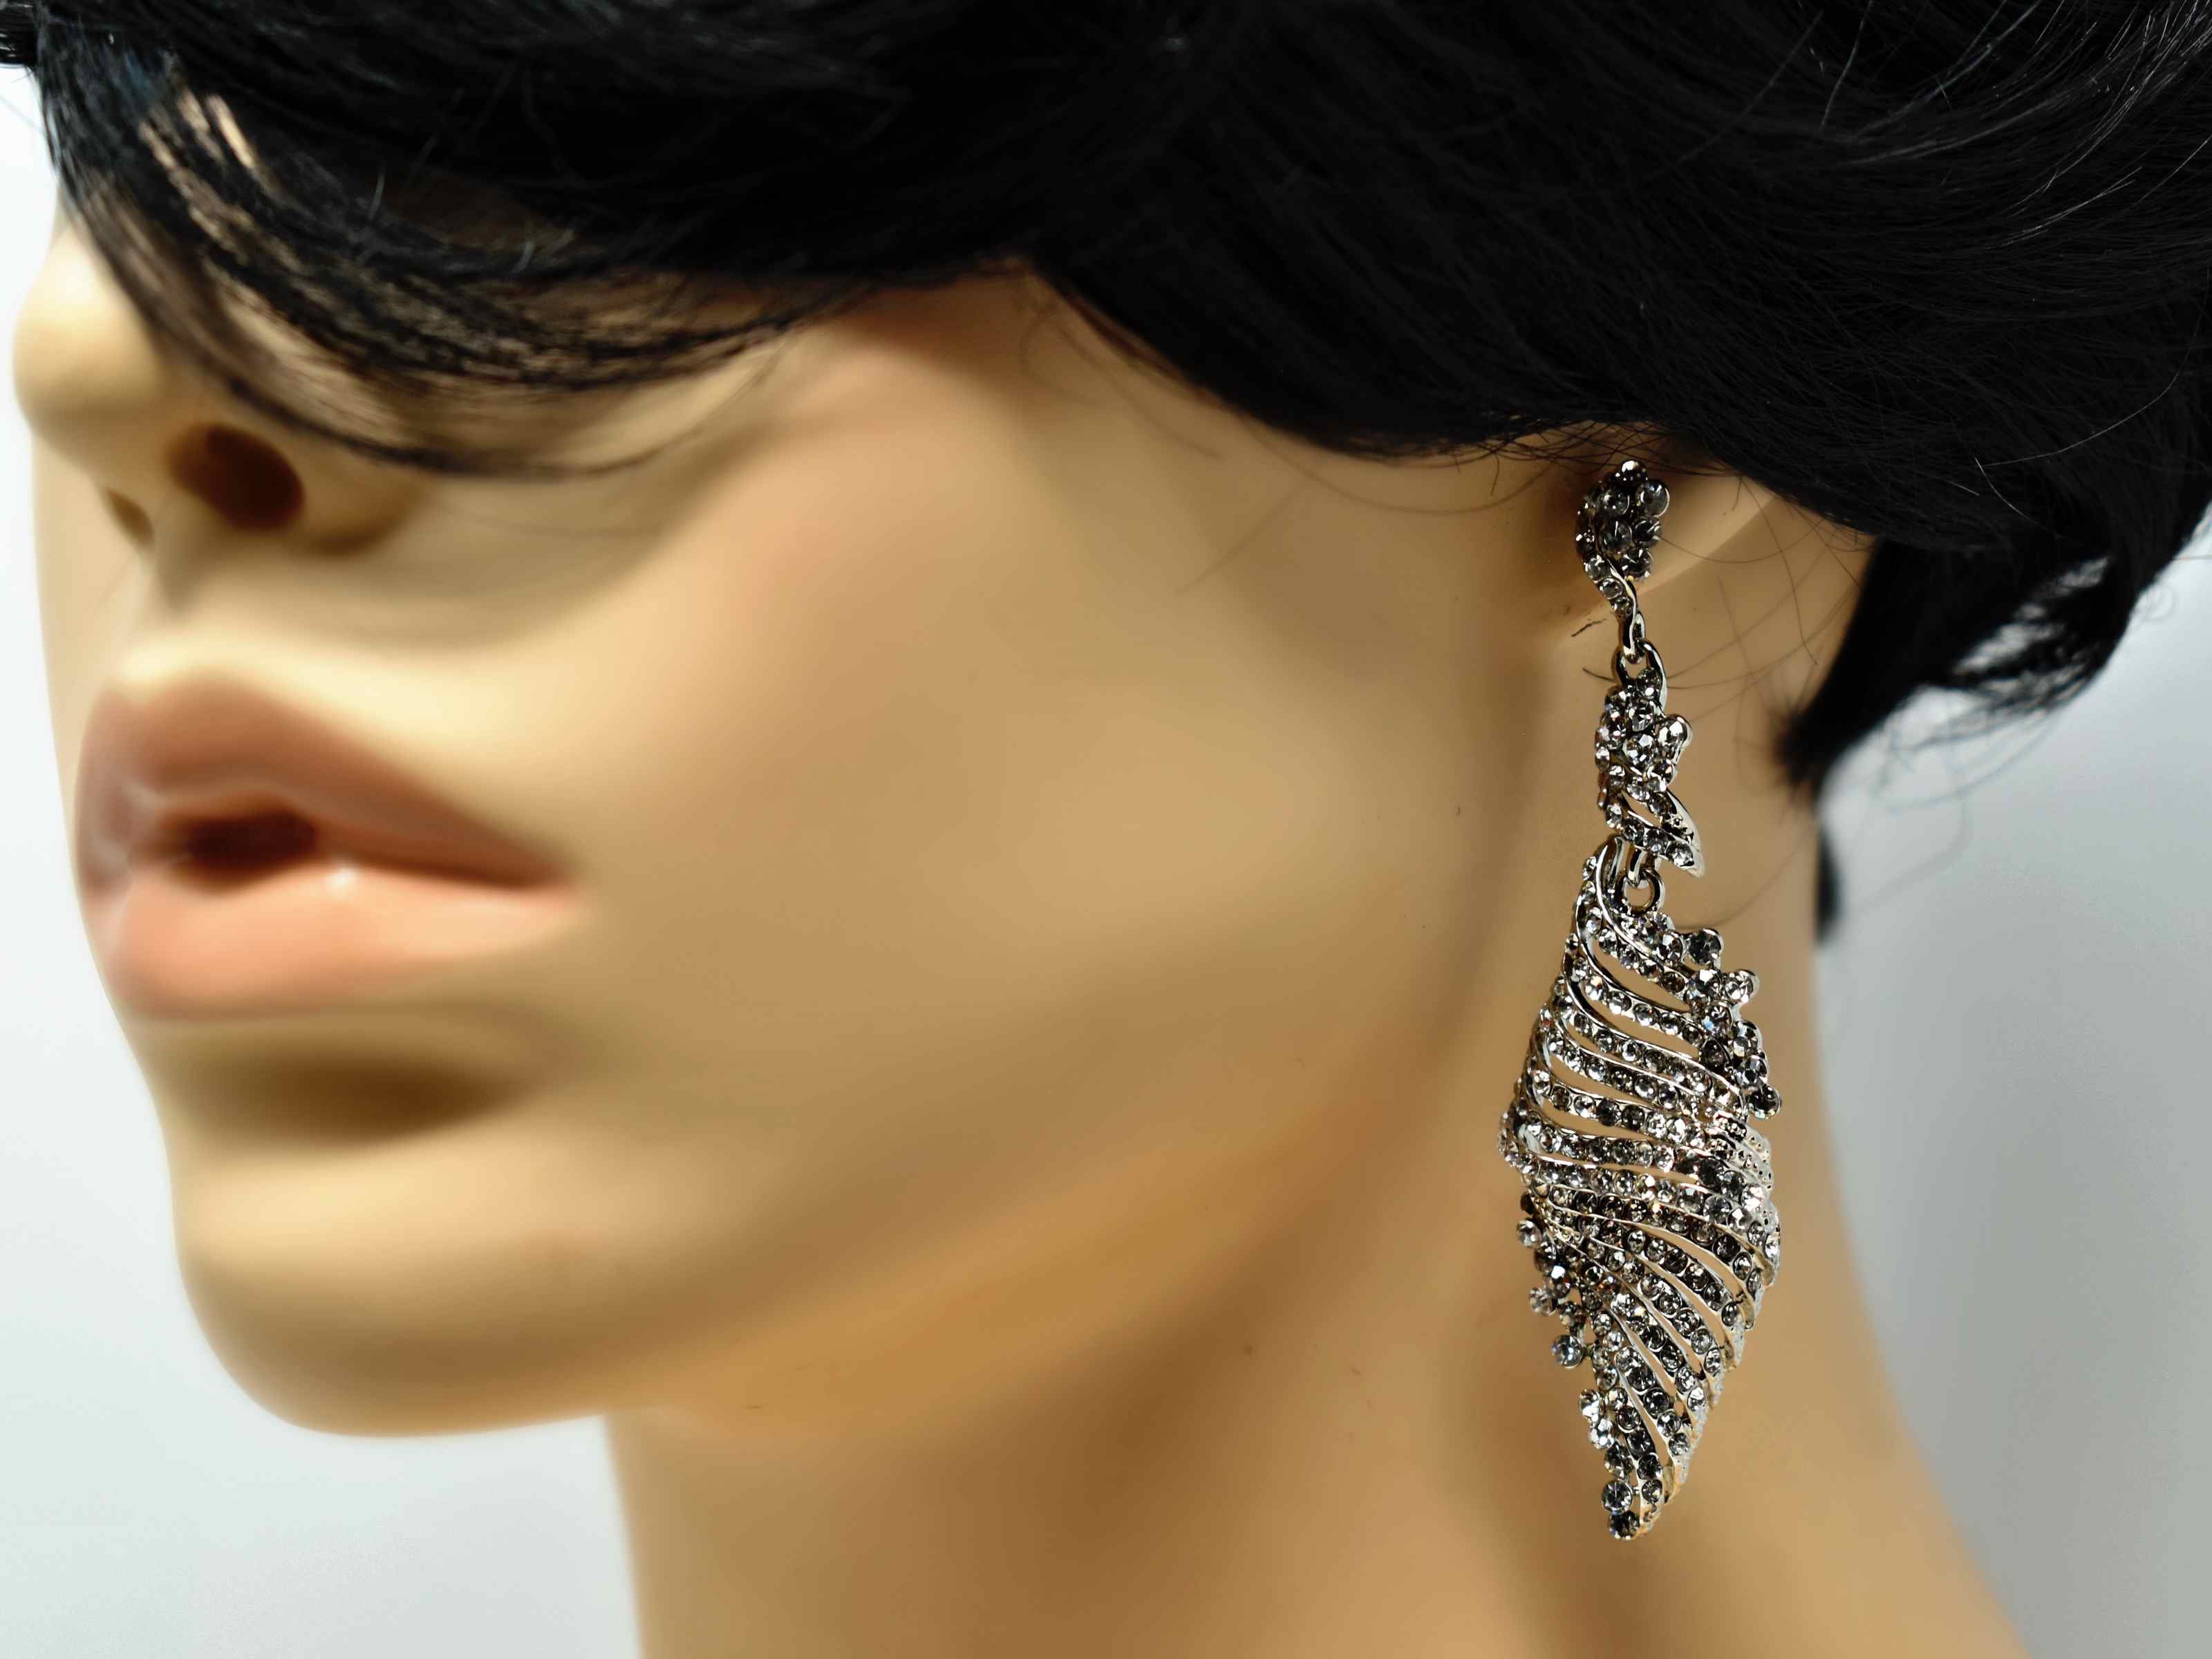 Our glitzy heliotrope silver dangle leaf style earrings are encrusted with clear stones  all over.  It is  3 inches in length with a push back clasp.